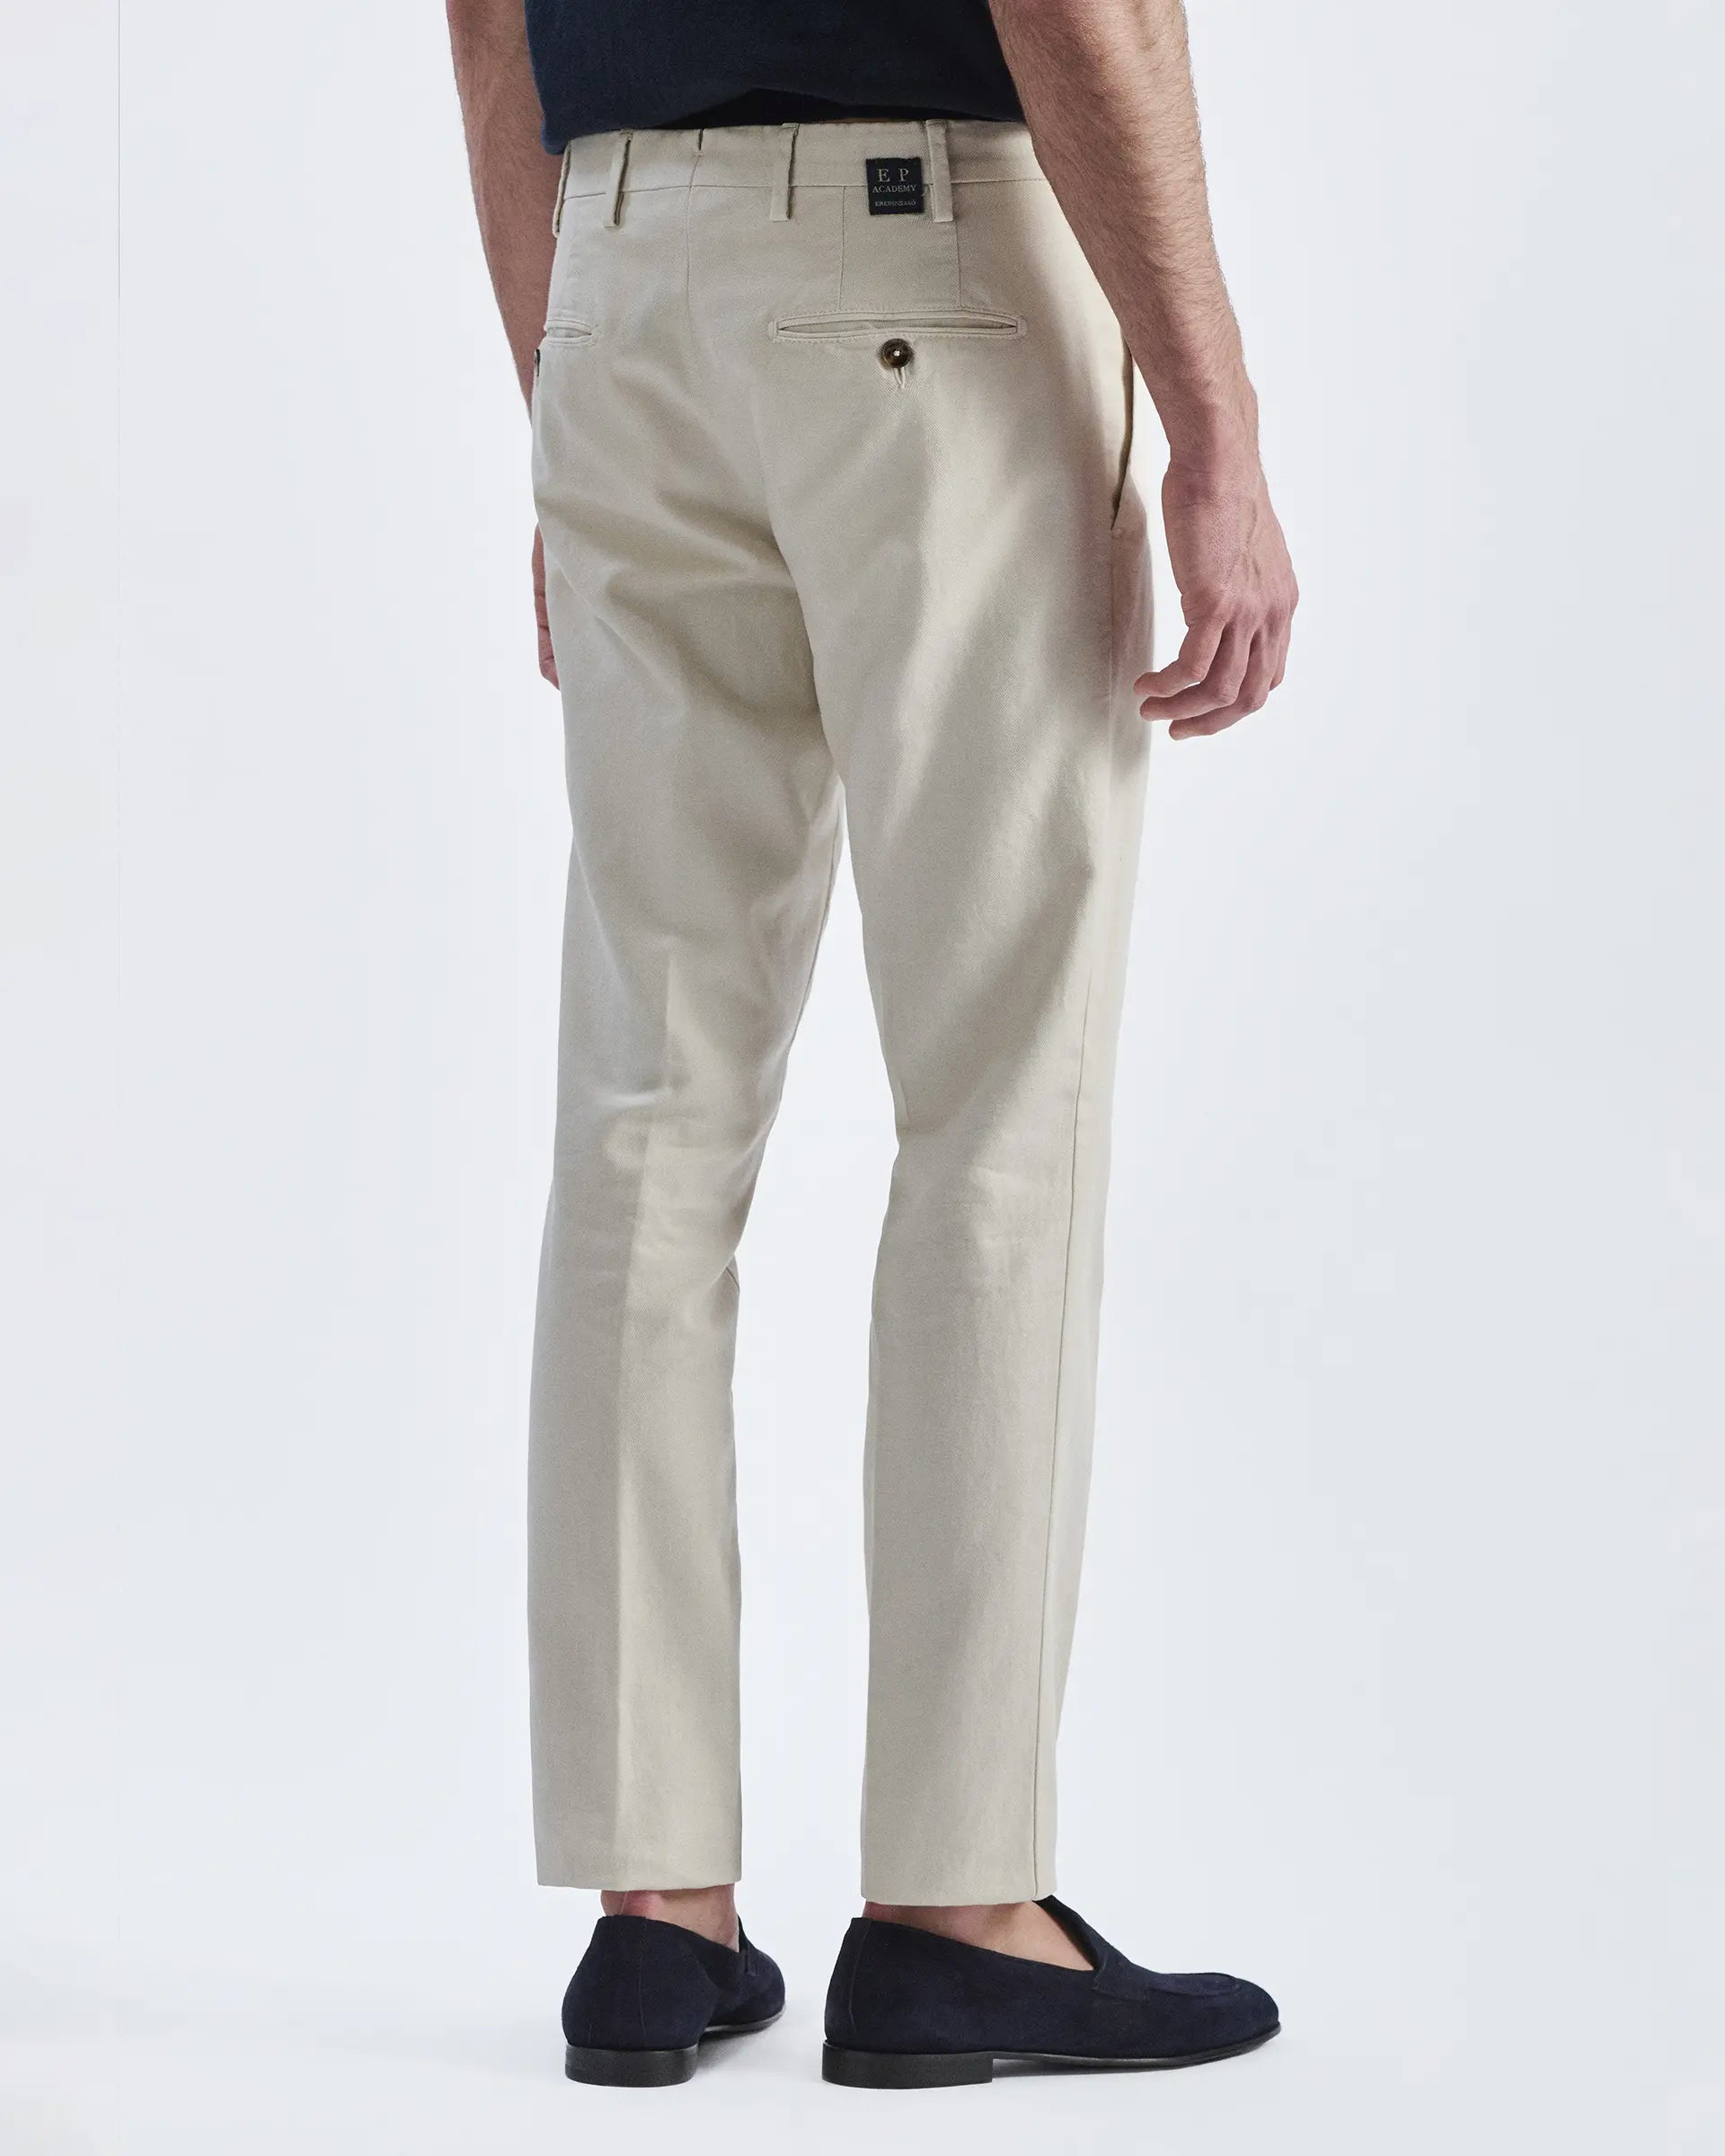 Beige Linen and Cotton Stretch Pants